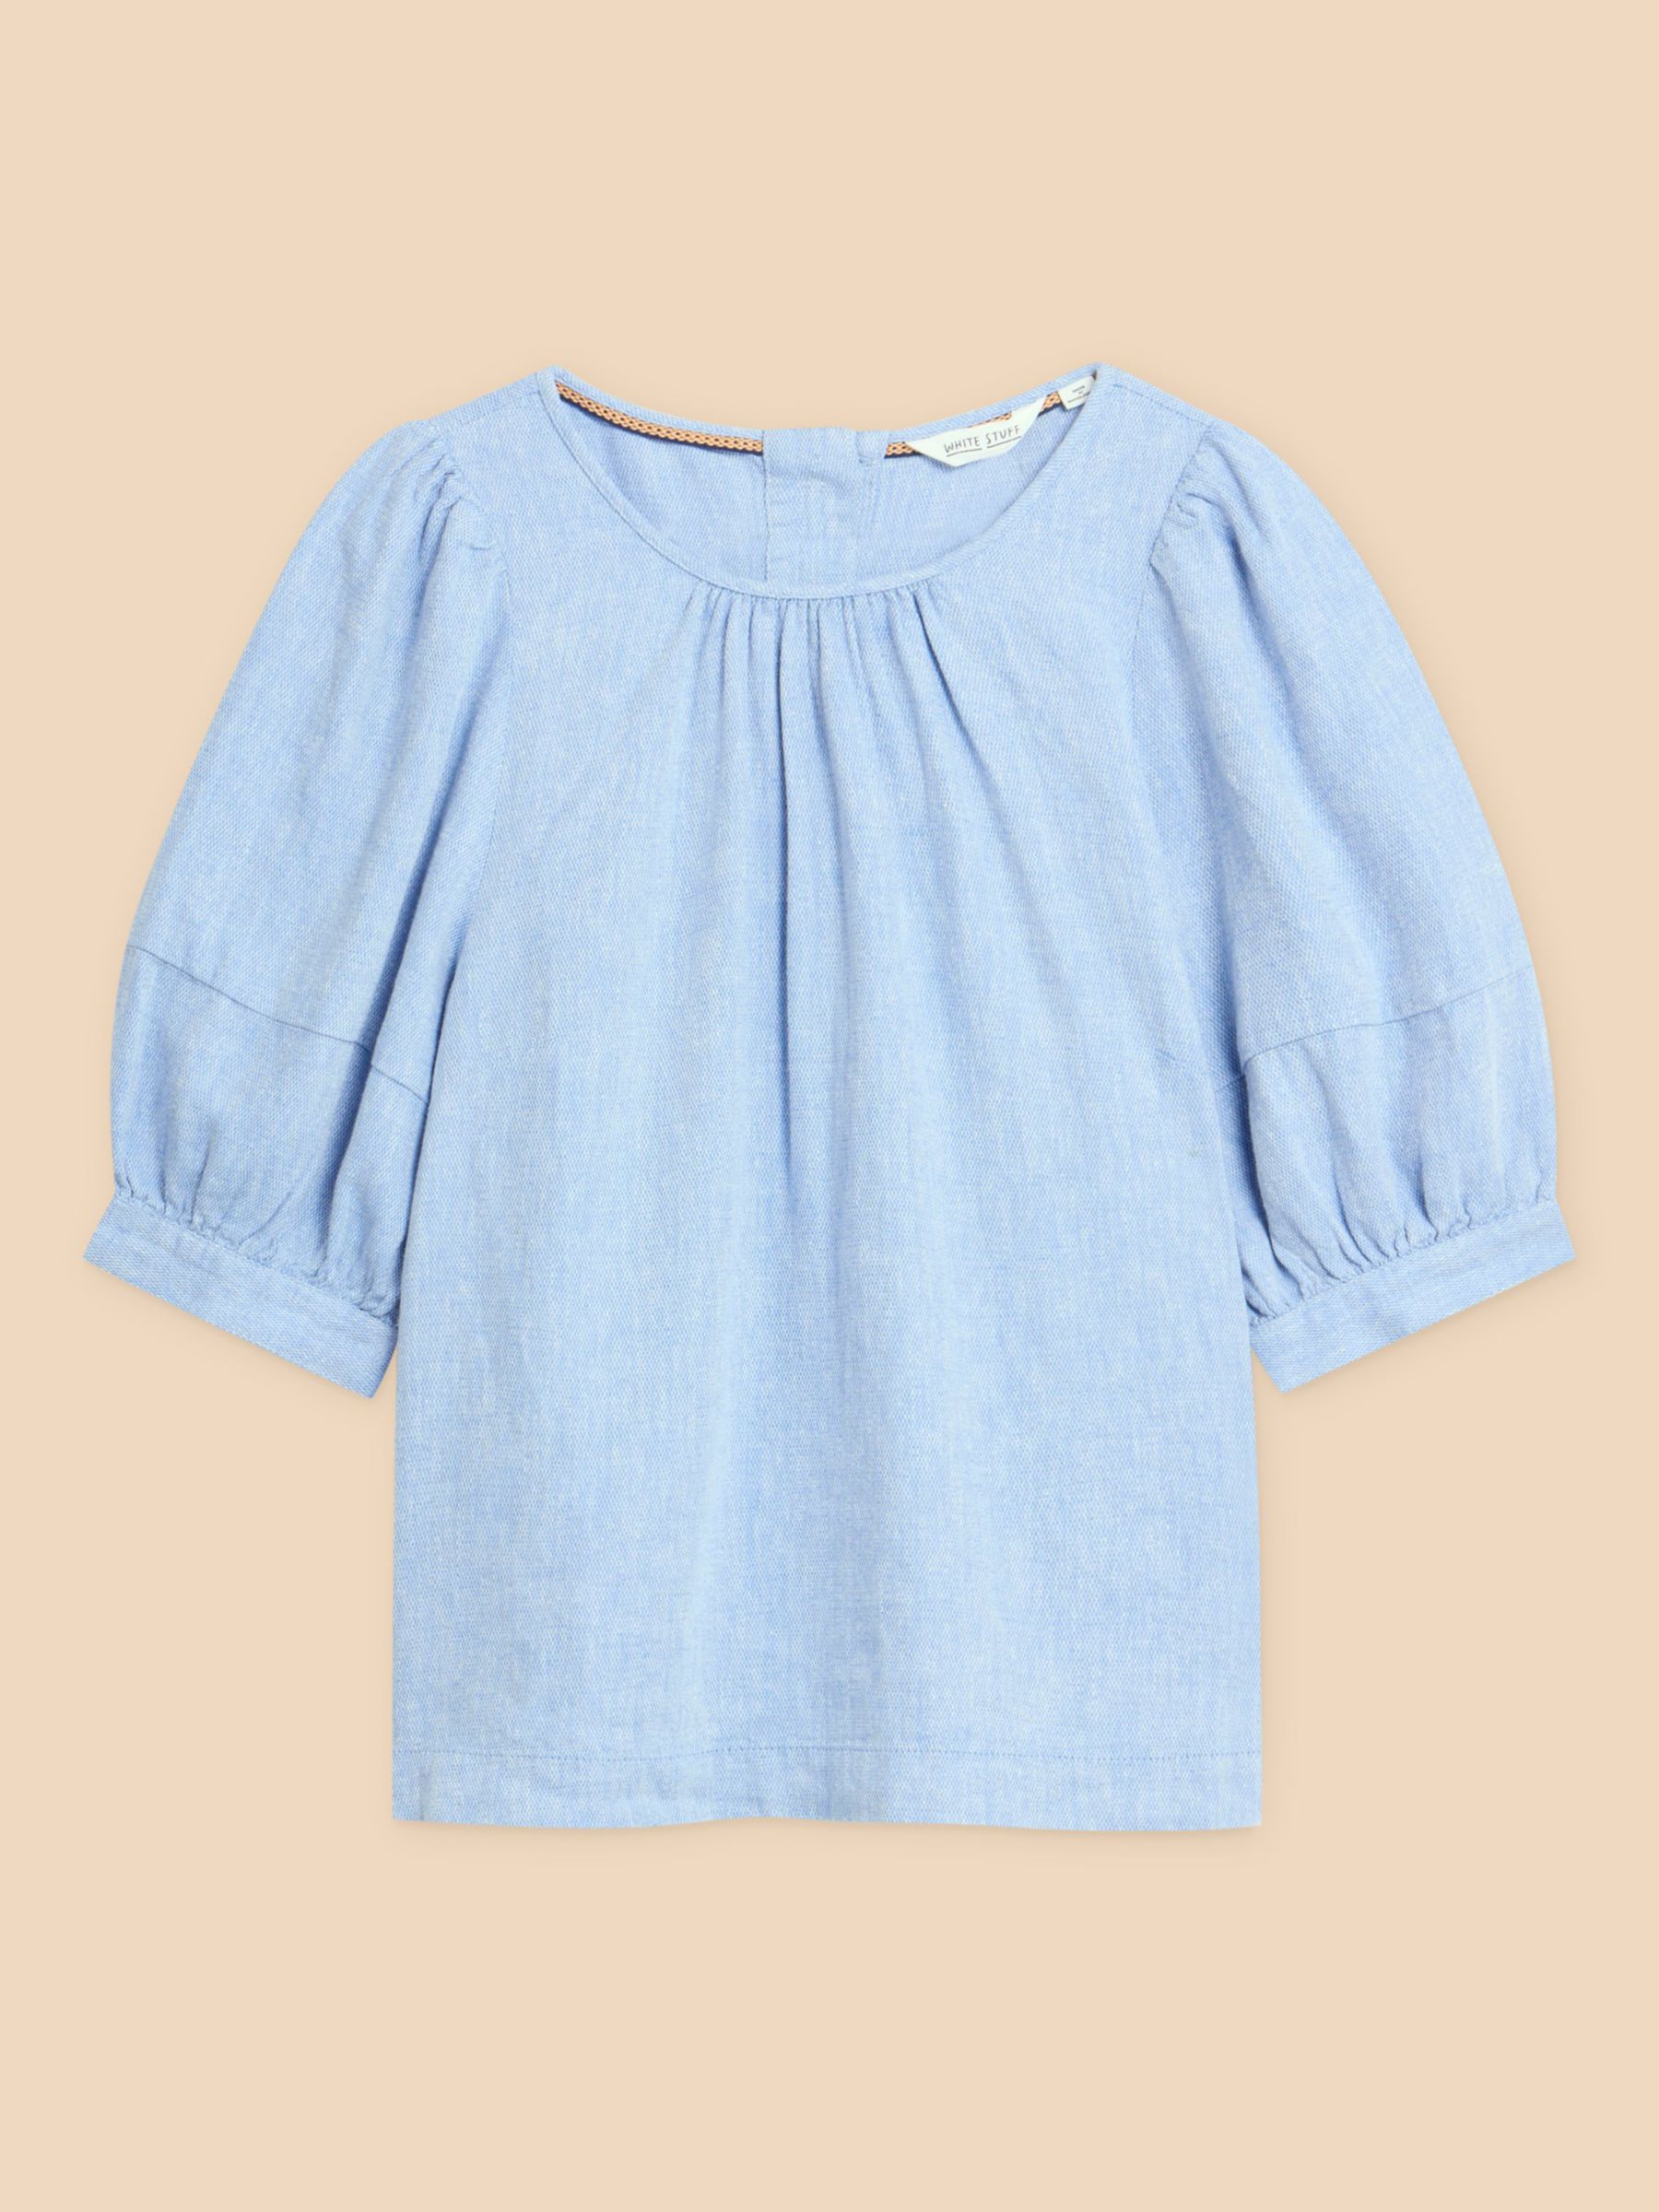 White Stuff Shelly Linen Blend Top, Chambray Blue at John Lewis & Partners